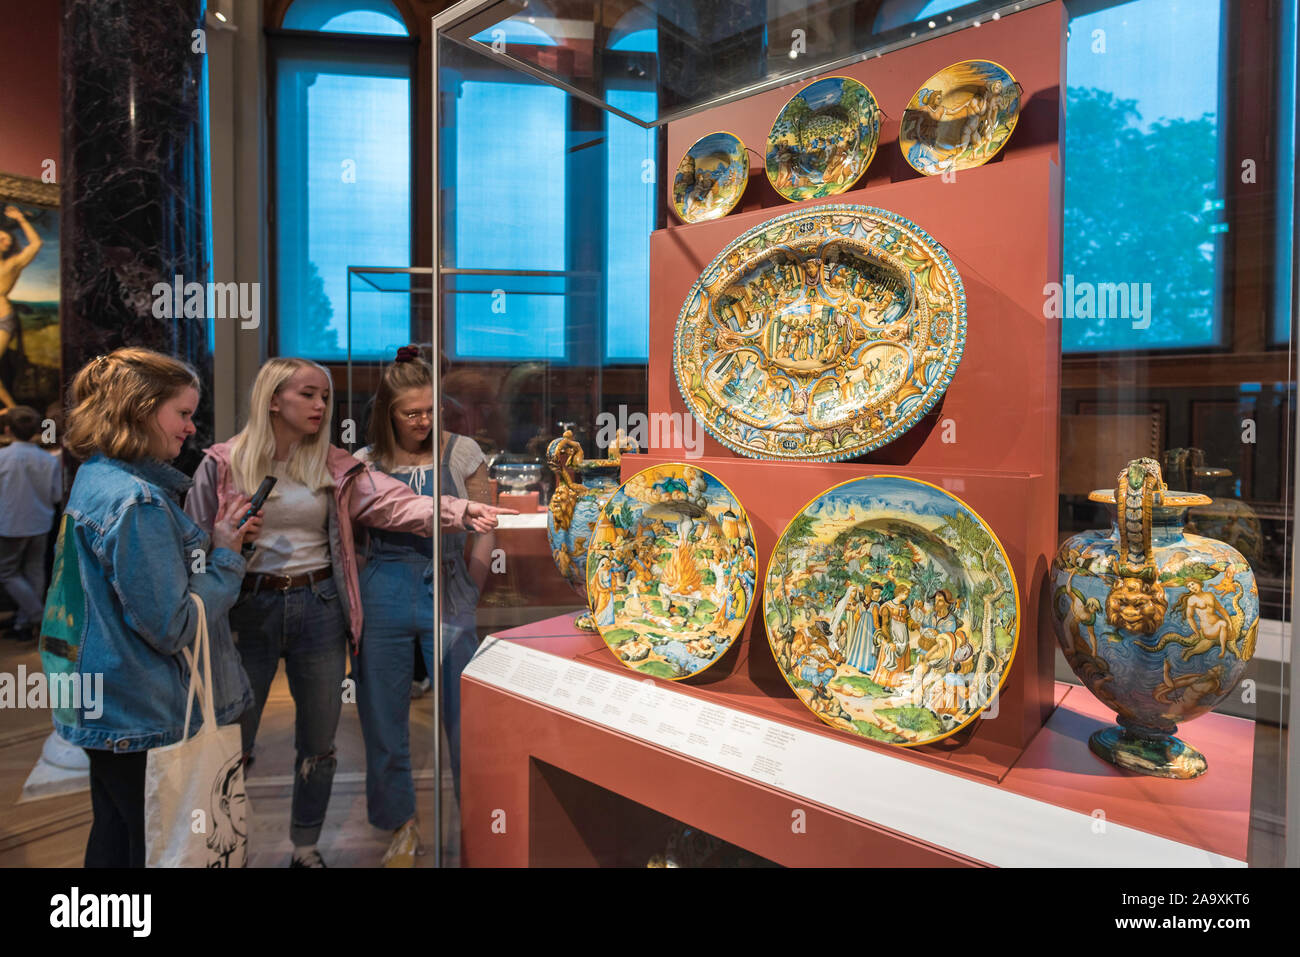 Ceramic majolica, view of young people studying a display of 16th century Urbino majolica tableware on display in the Nationalmuseum, Stockholm Sweden. Stock Photo